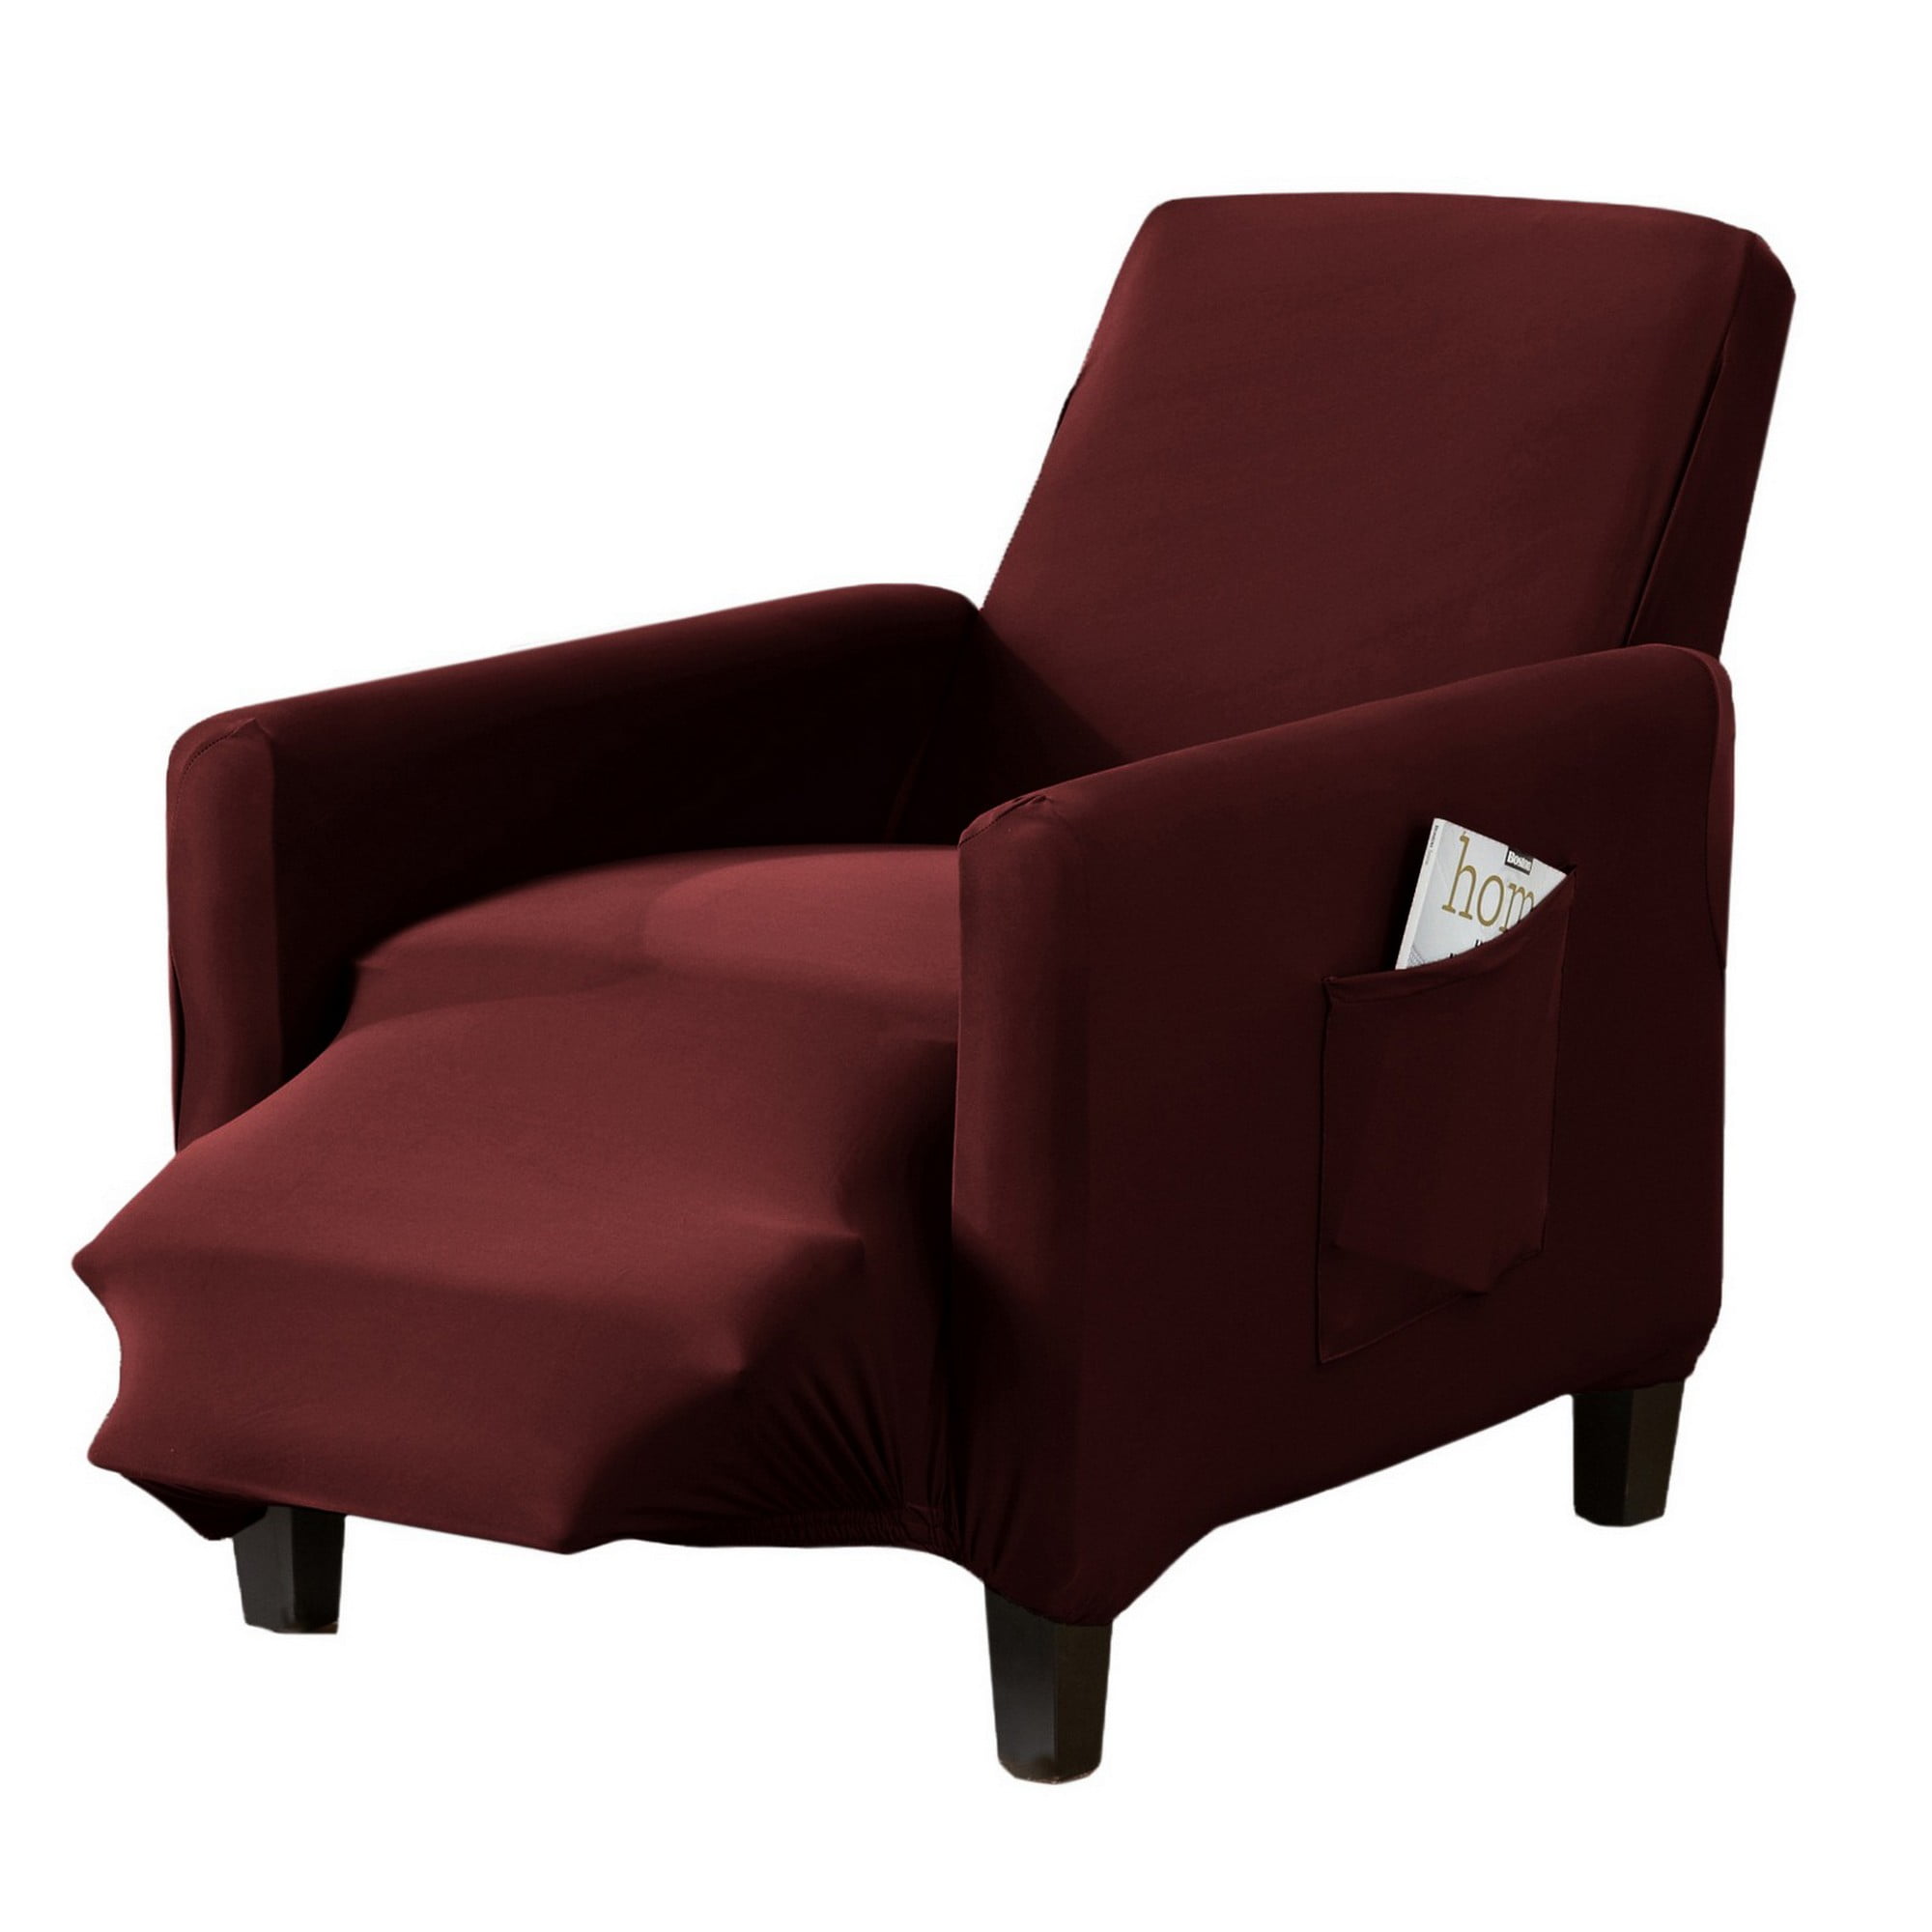 --BURGUNDY--LAZY BOY-A GREAT BUY !! CHAIR/SOFA/LOVESEAT/RECLINER JERSEY COVERS 